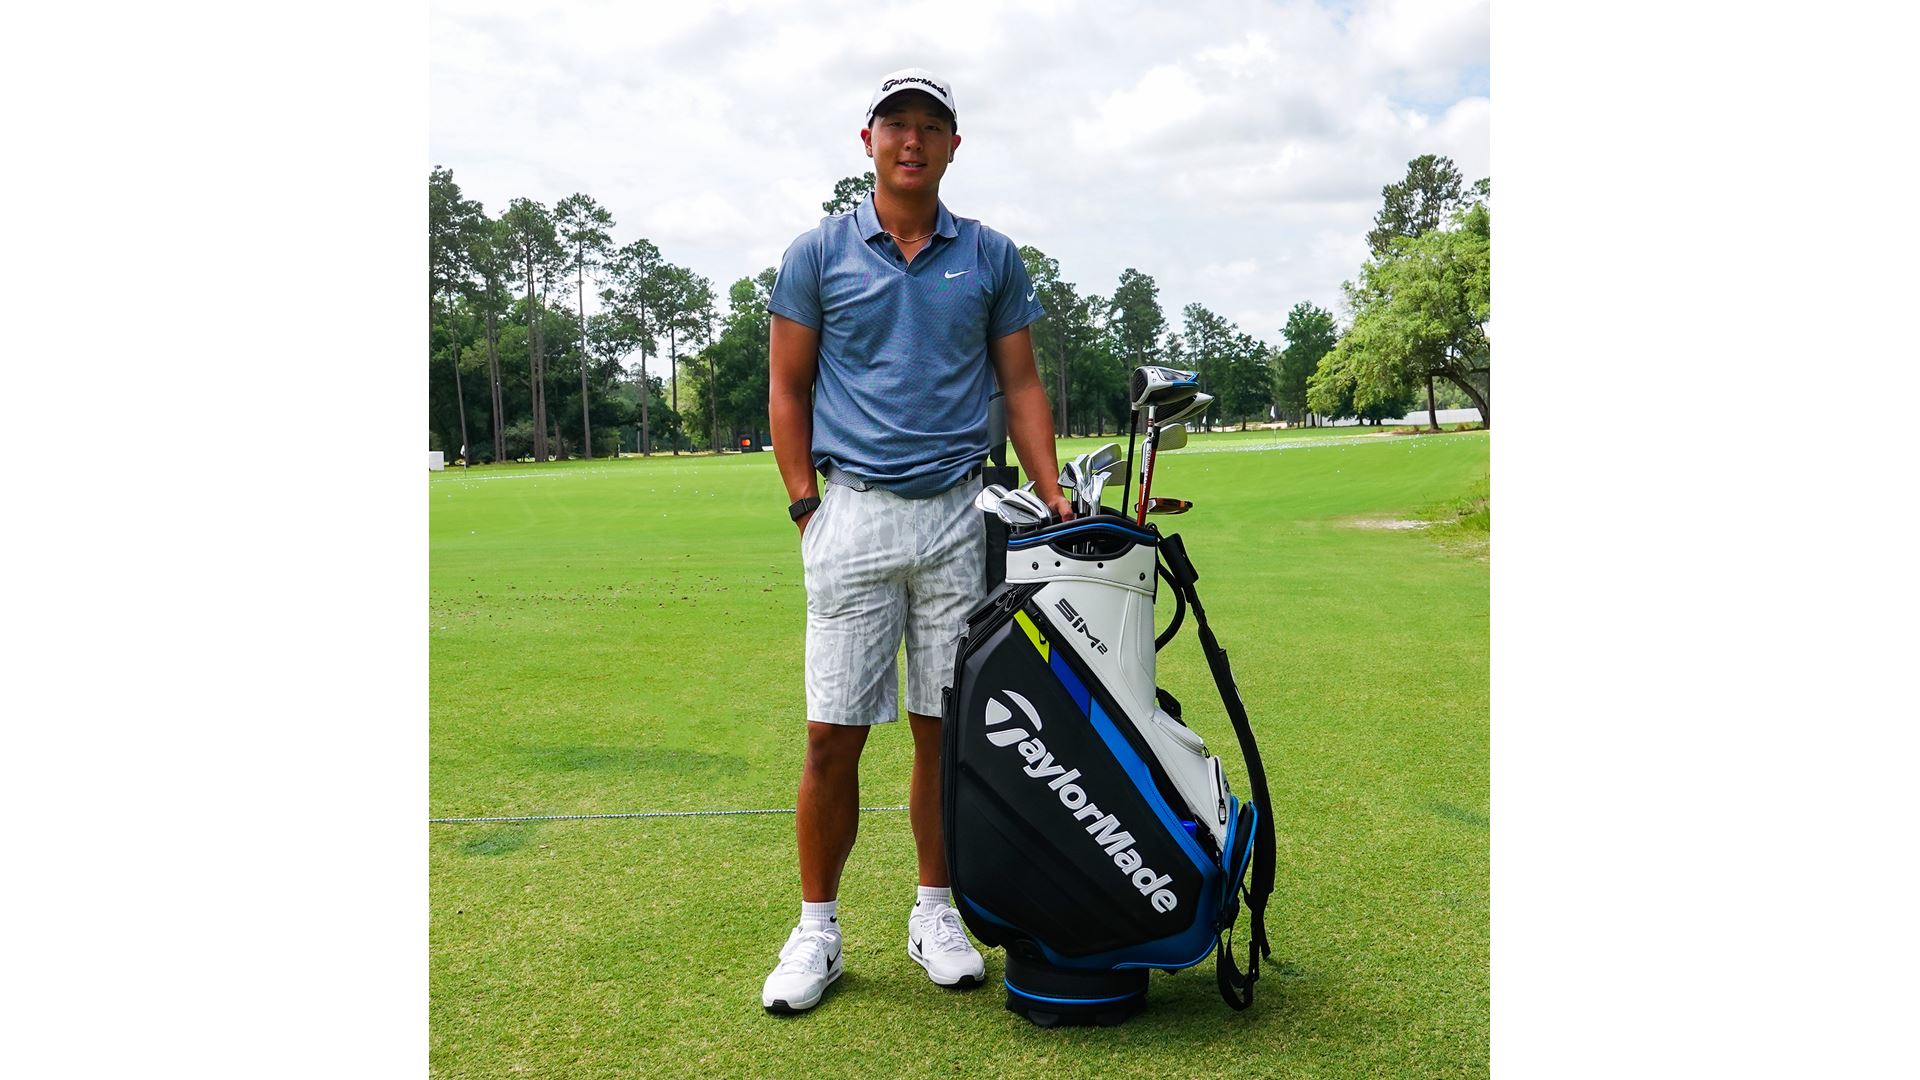 College Golf's Top-Ranked Player, John Pak, Signs With TaylorMade Golf Company